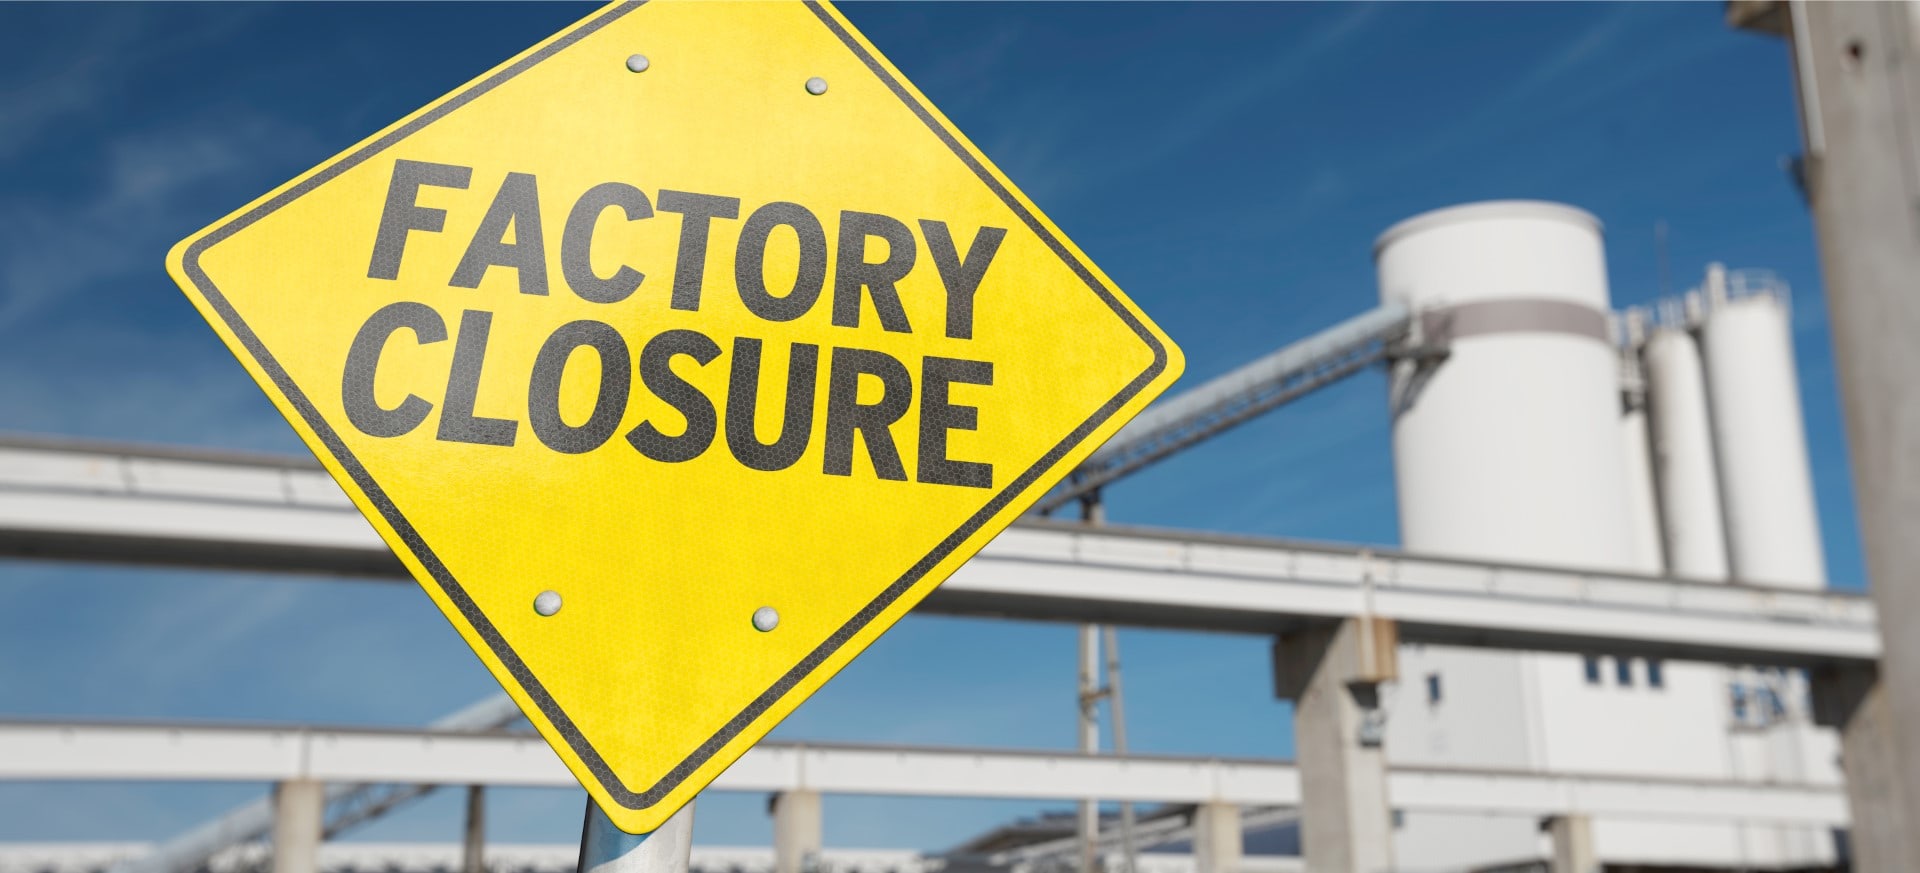 A sign with the word "FACTORY CLOSURE"